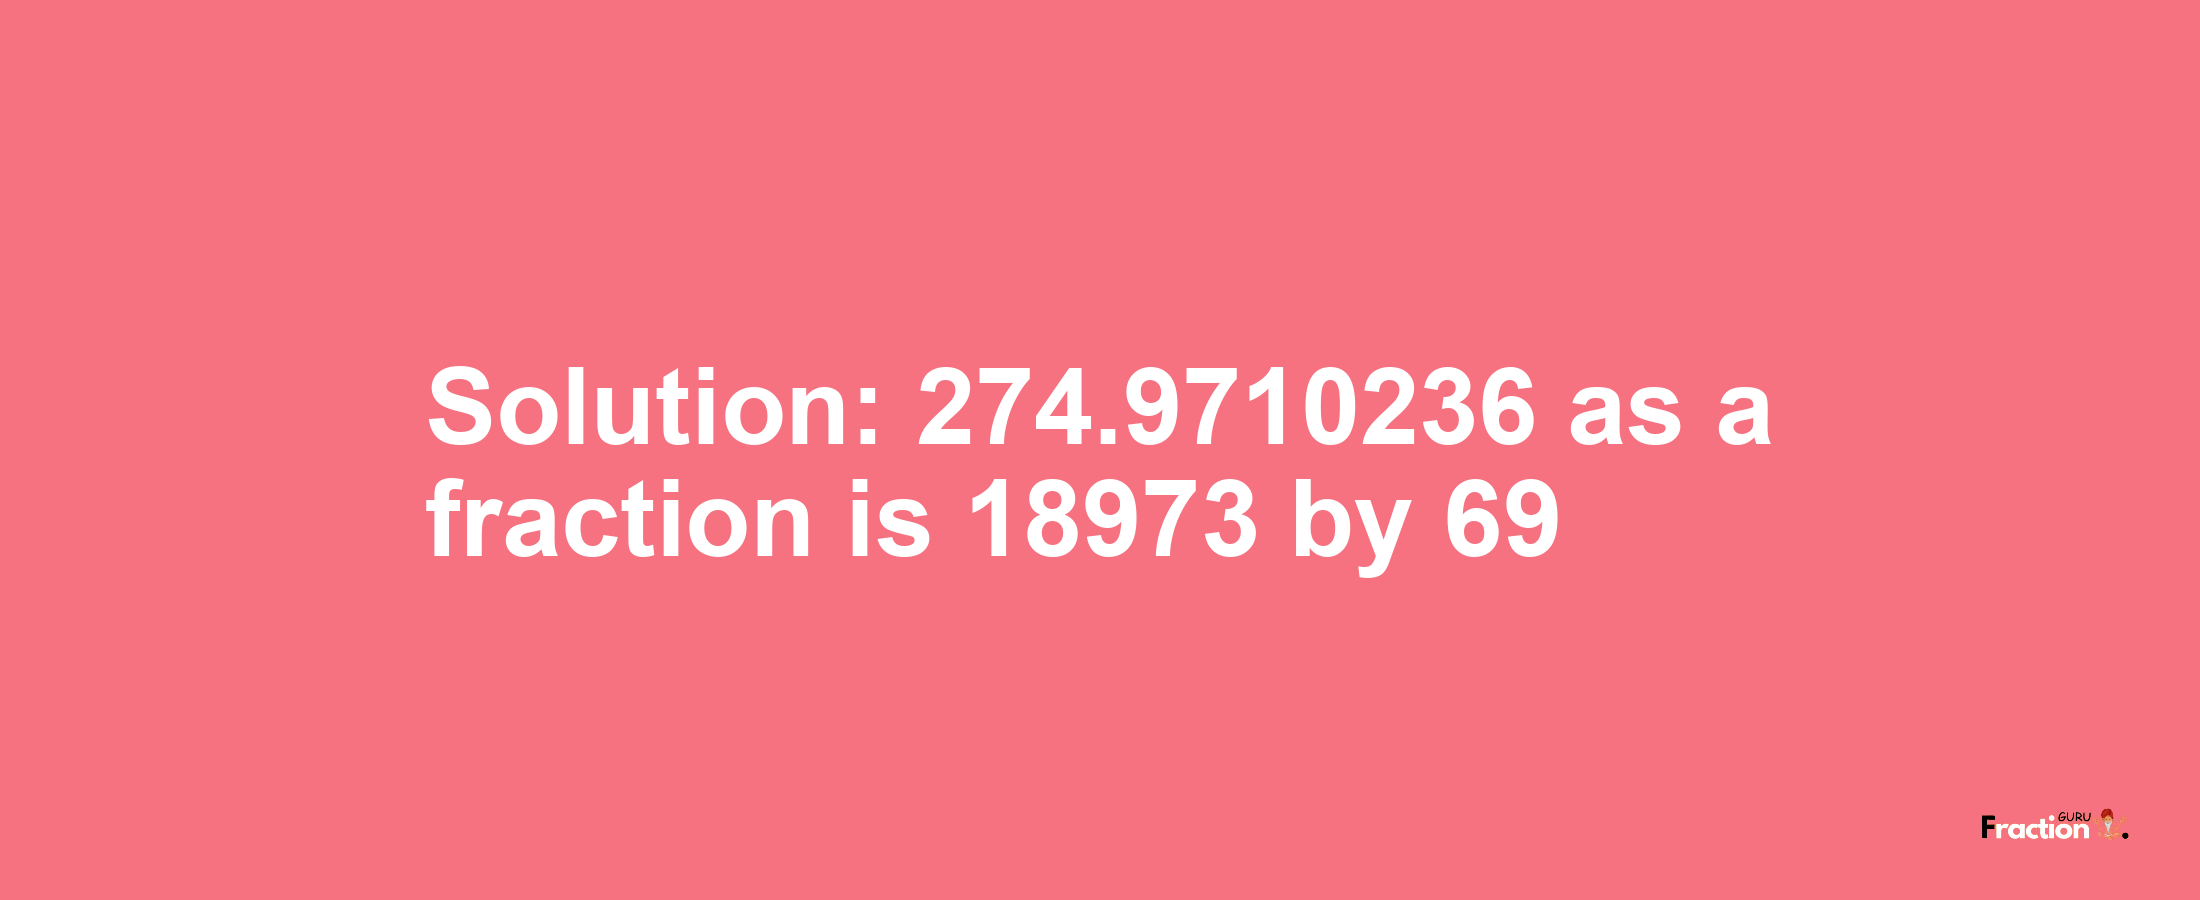 Solution:274.9710236 as a fraction is 18973/69